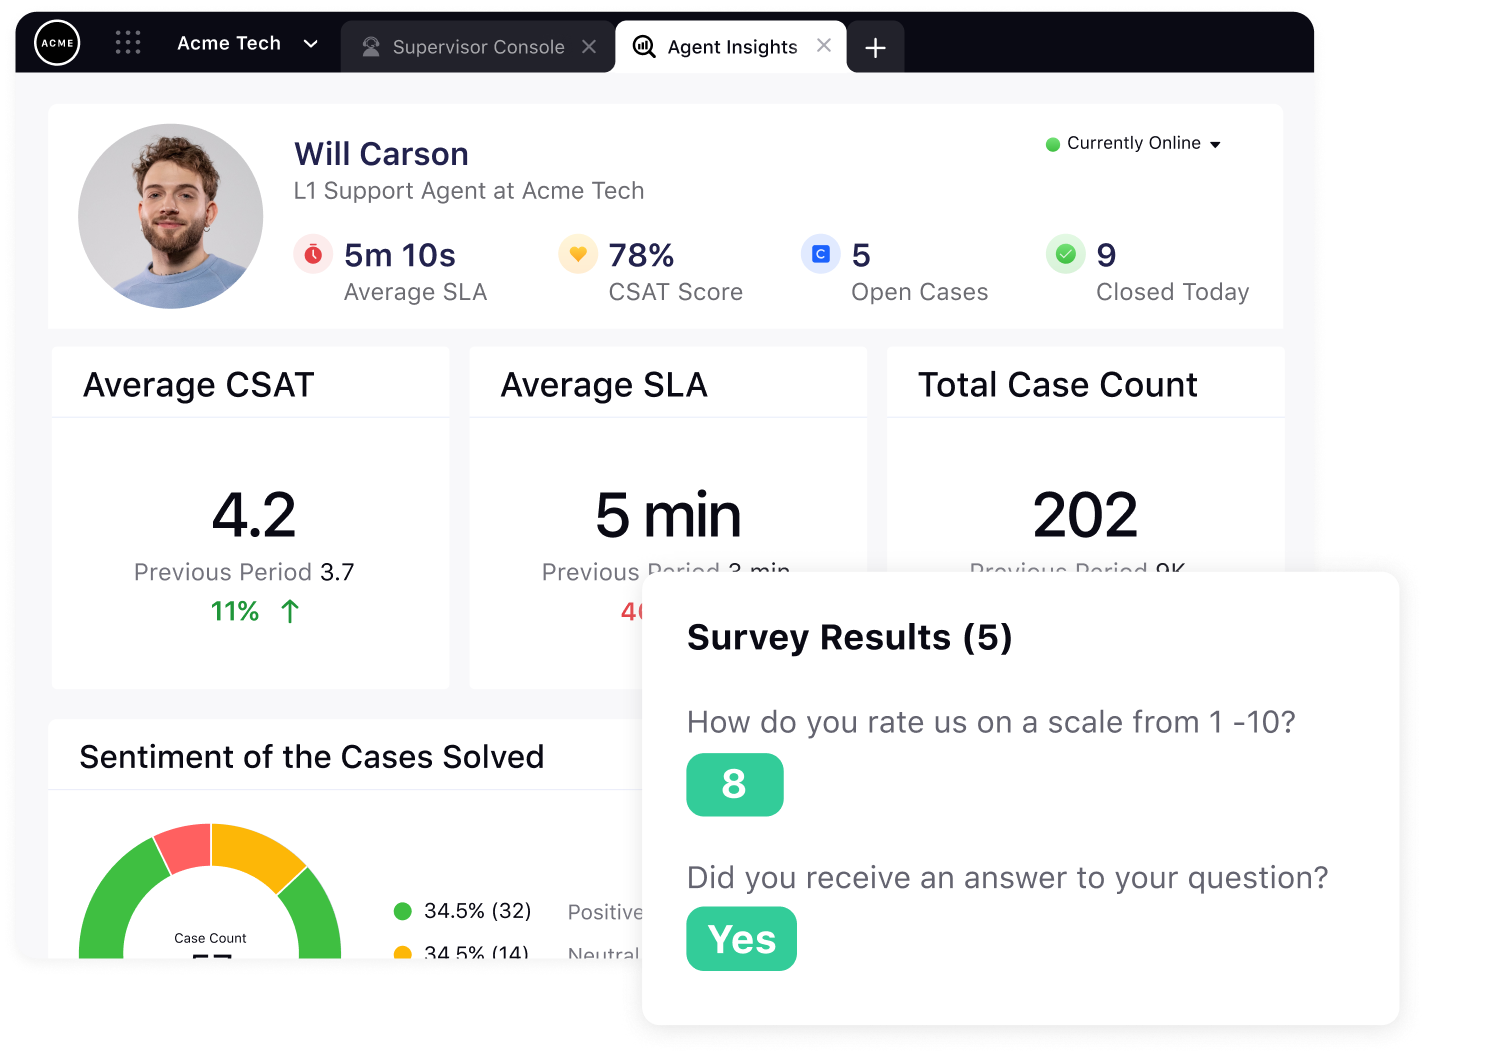 Sprinklr contact center software showing agent insights